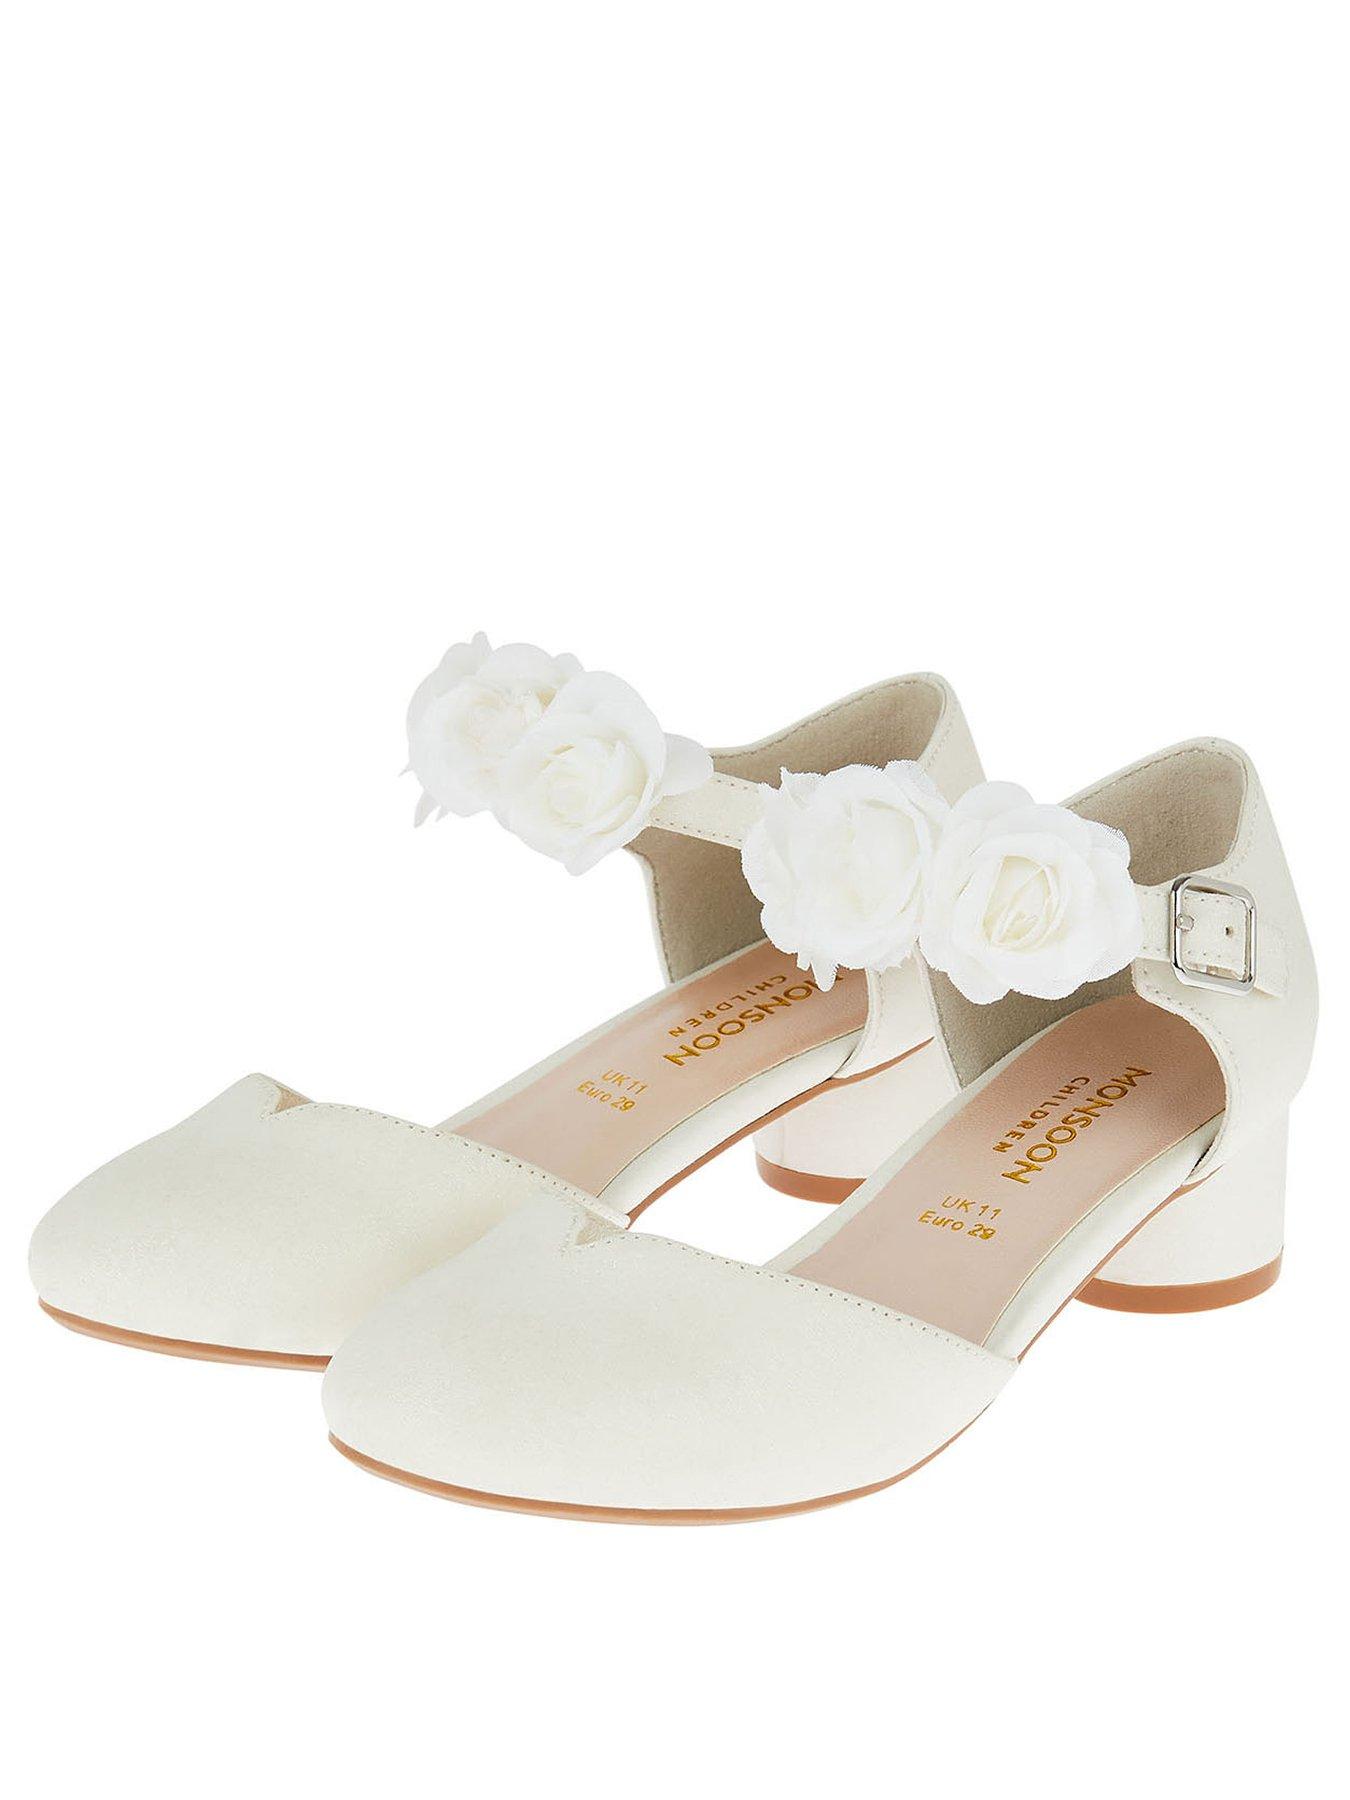  Girls Shimmer Two Part Corsage Heel Shoes - Ivory